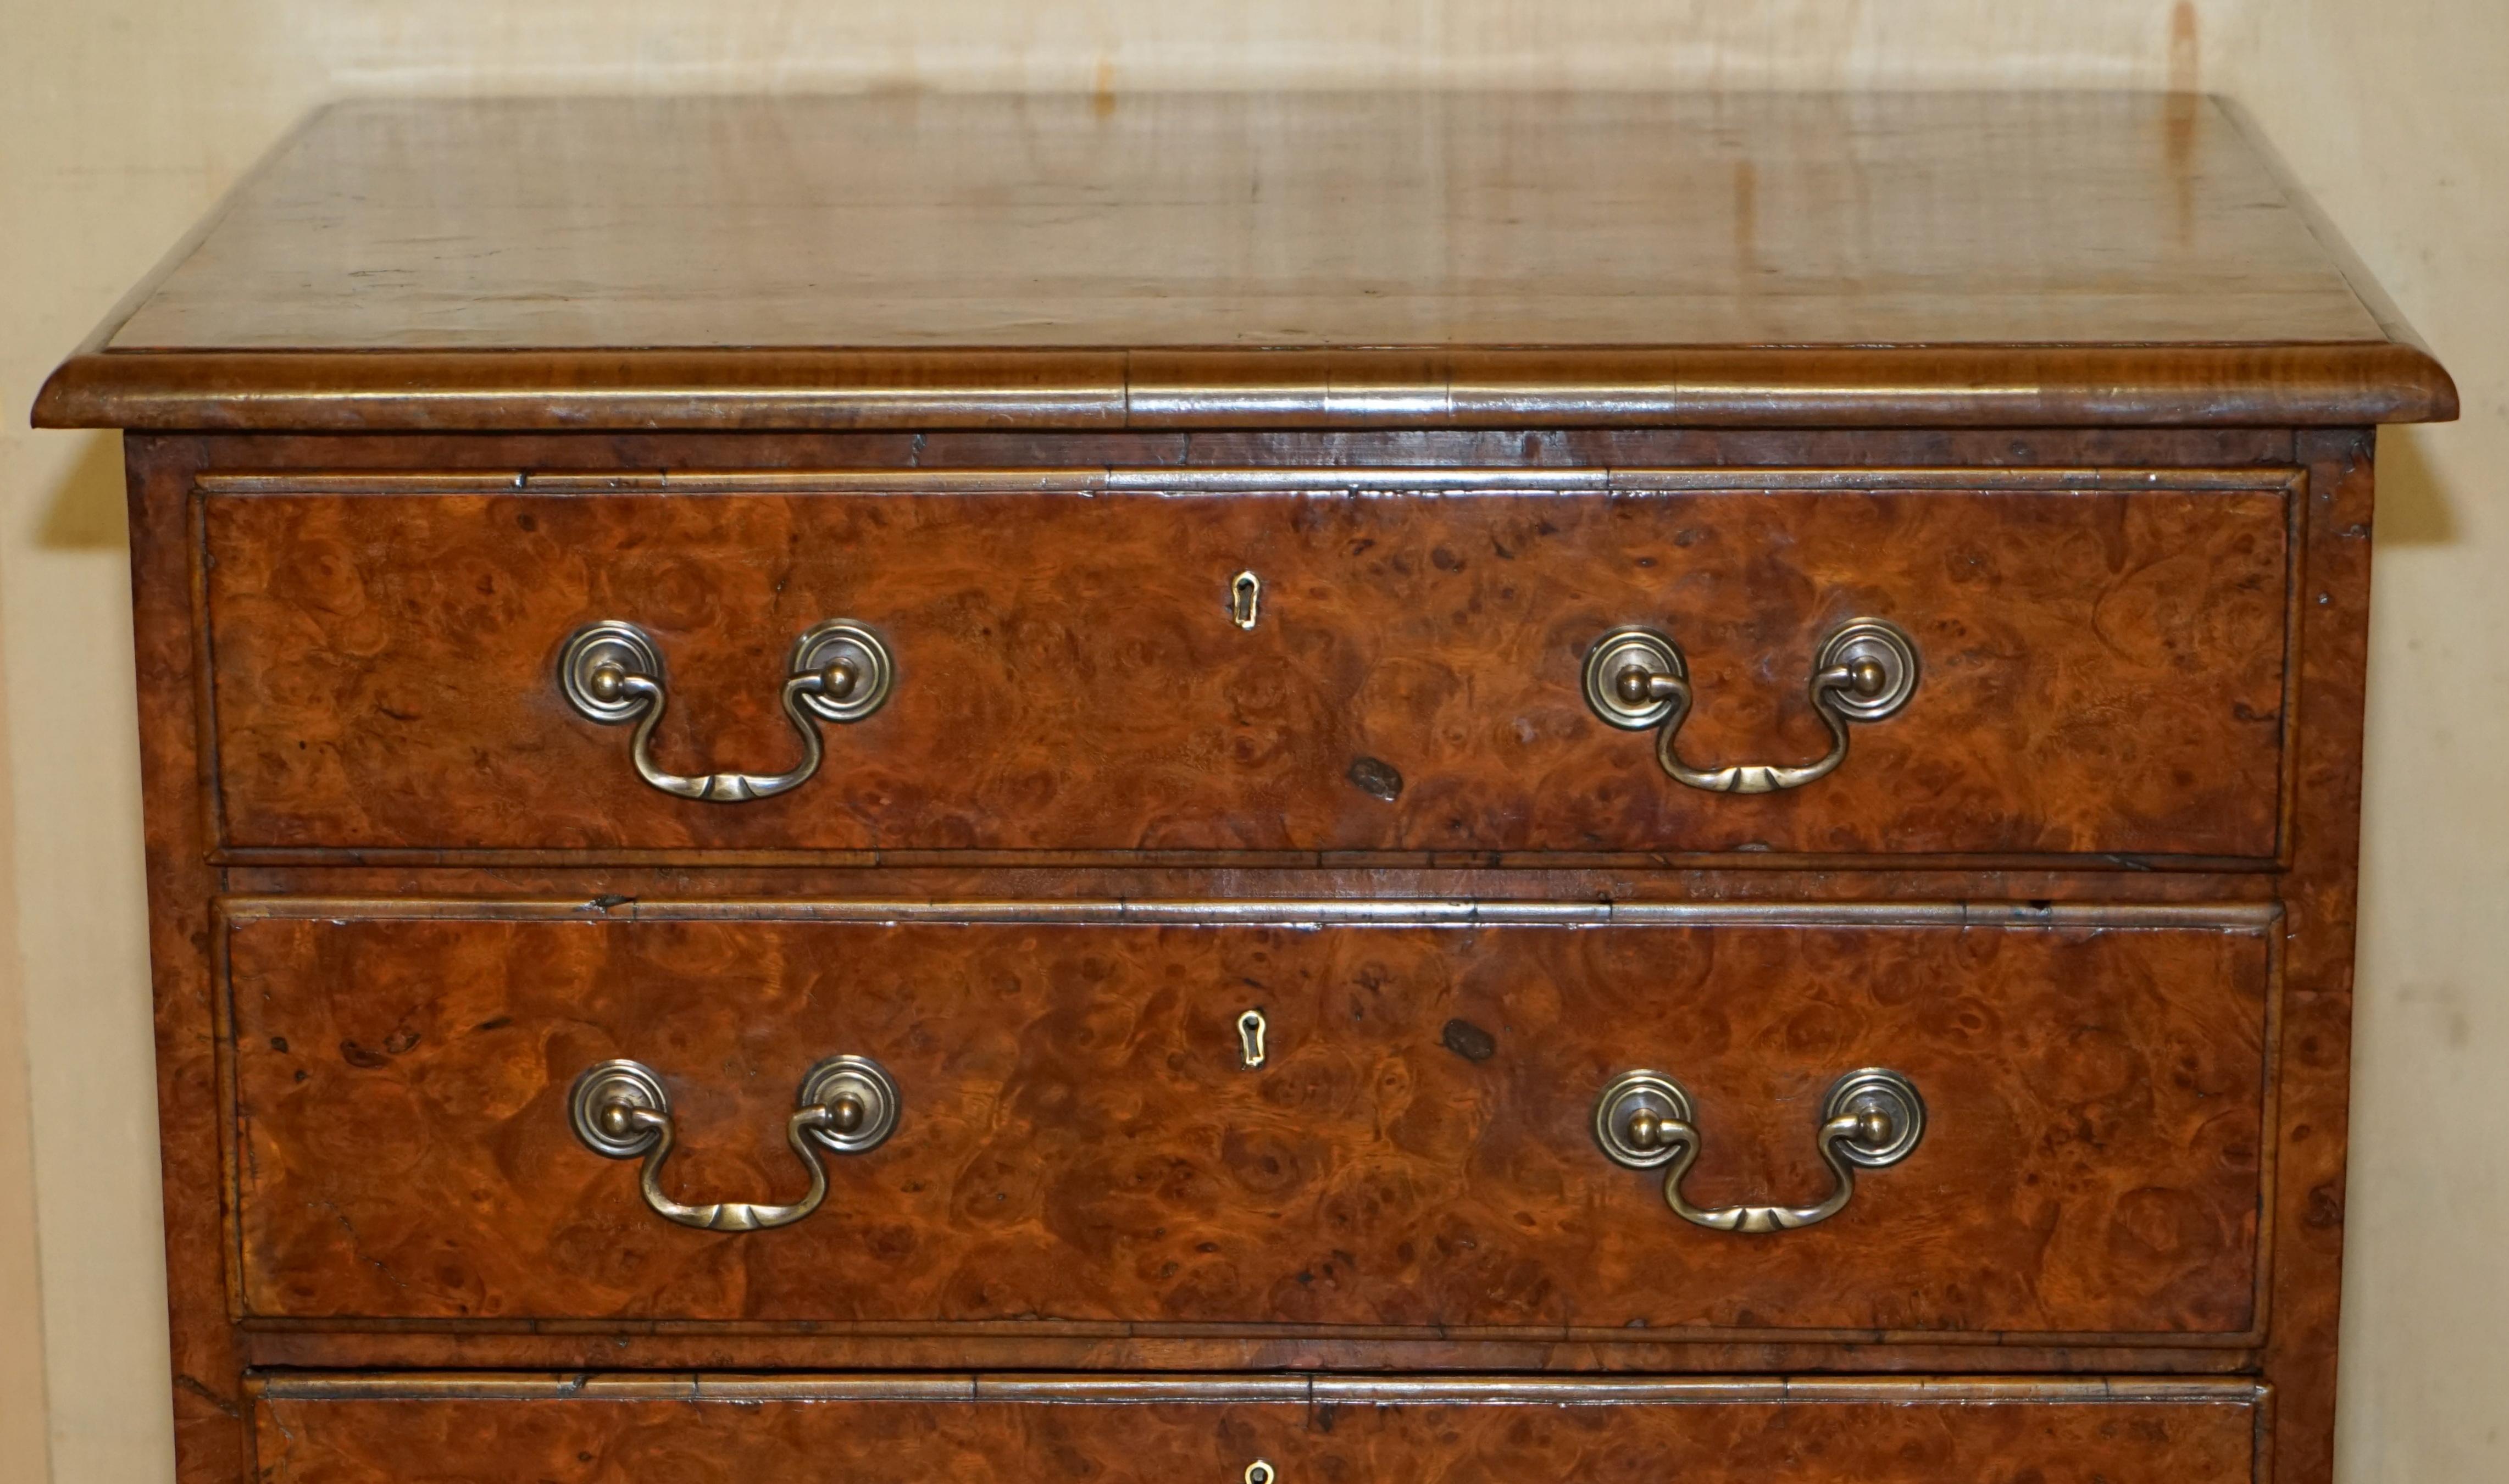 English SUPER FiNE FULLY RESTORED ANTIQUE GEORGIAN CIRCA 1780 BURR ELM CHEST OF DRAWERs For Sale